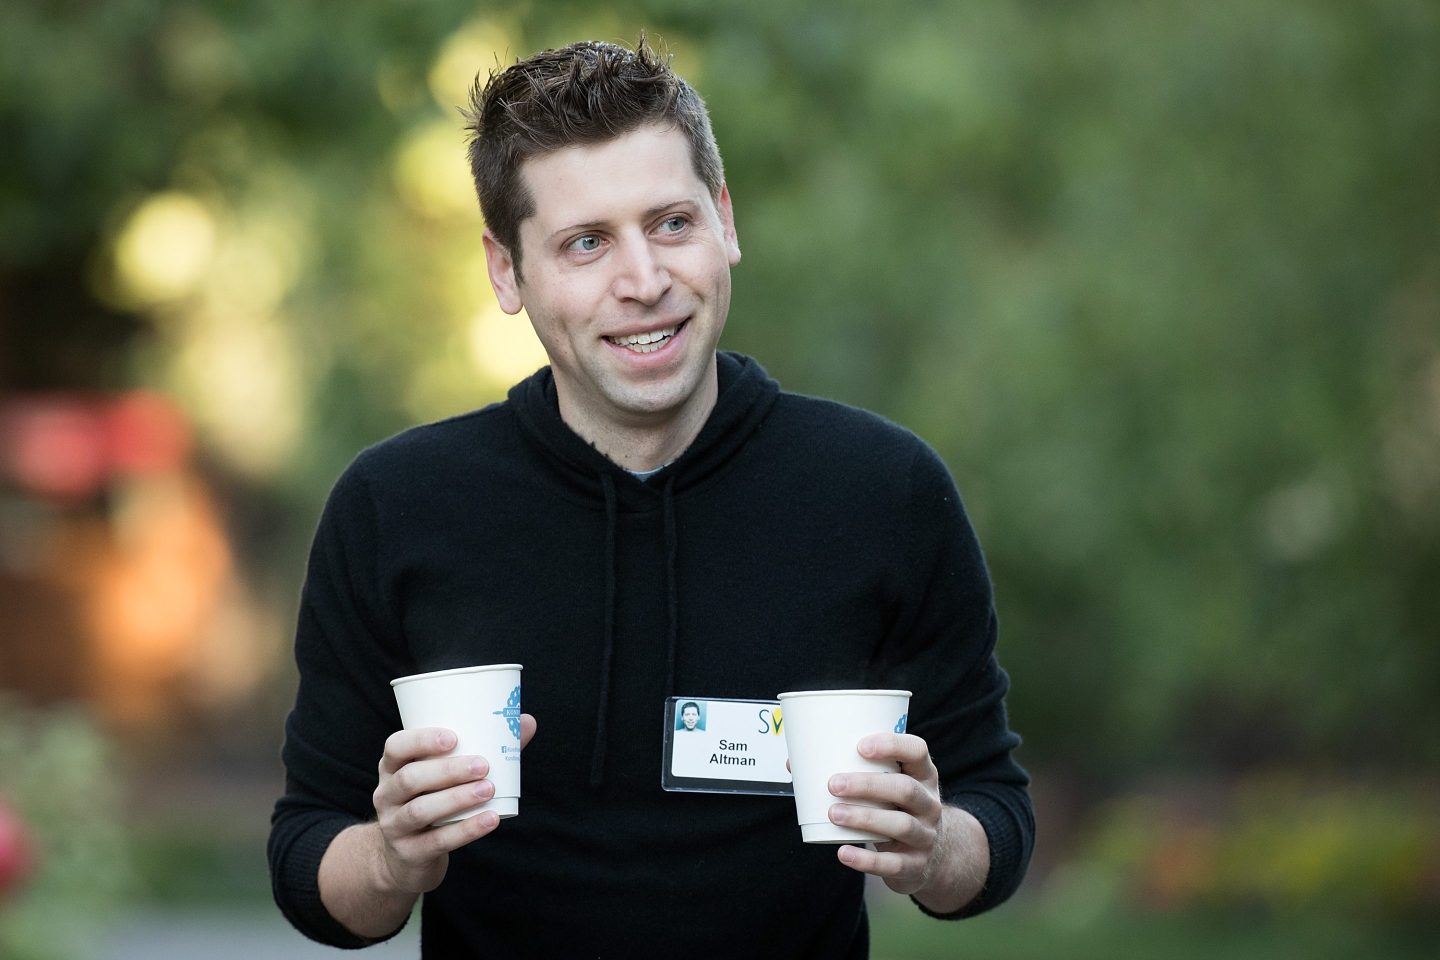 OpenAI founder and CEO Sam Altman holding two paper cups.